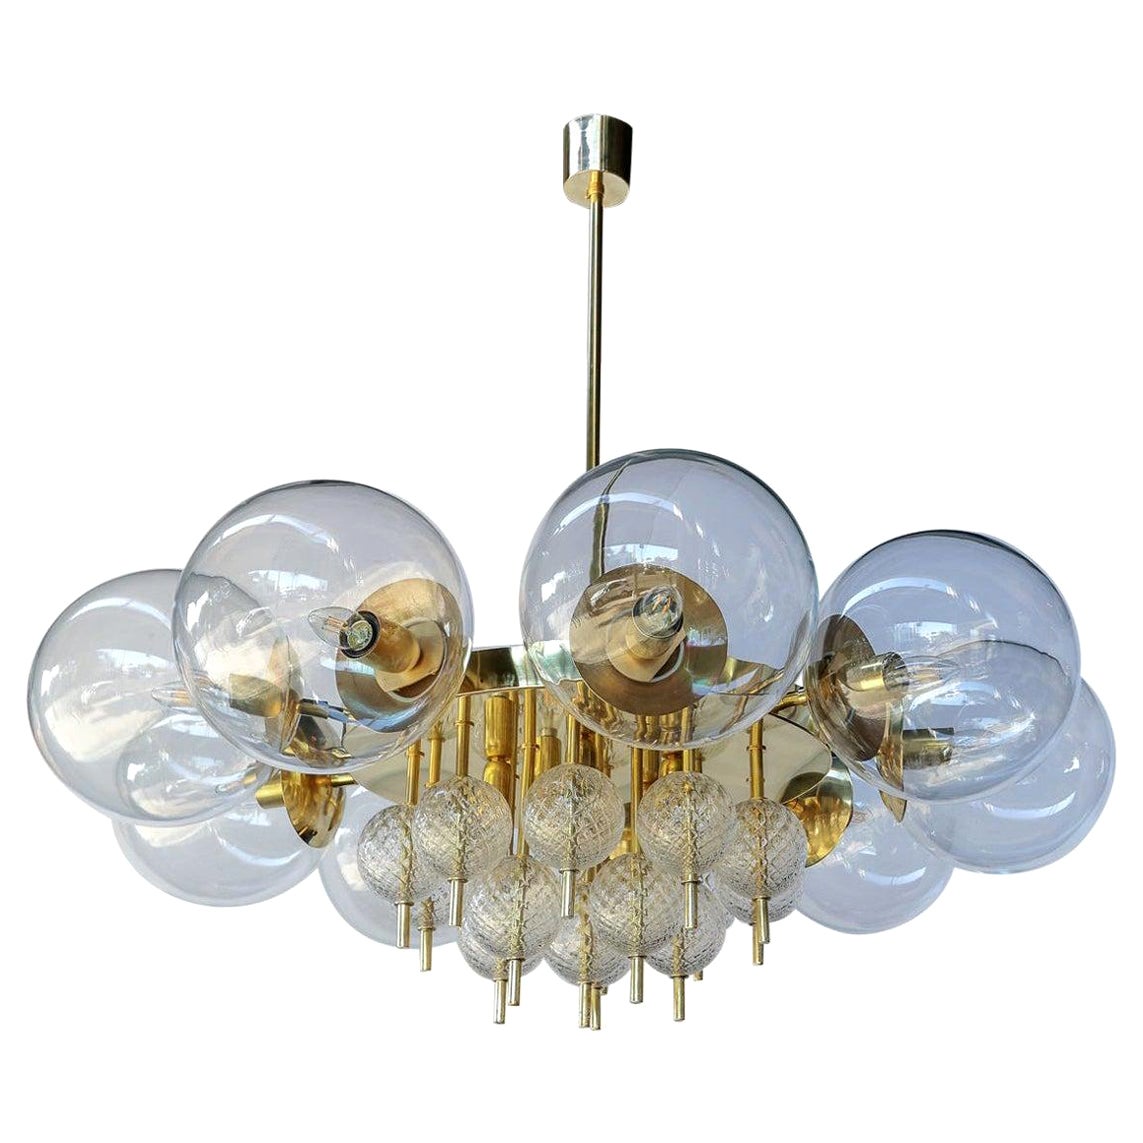 Custom Midcentury Style Brass Chandelier with Clear Glass Balls by Adesso Import For Sale